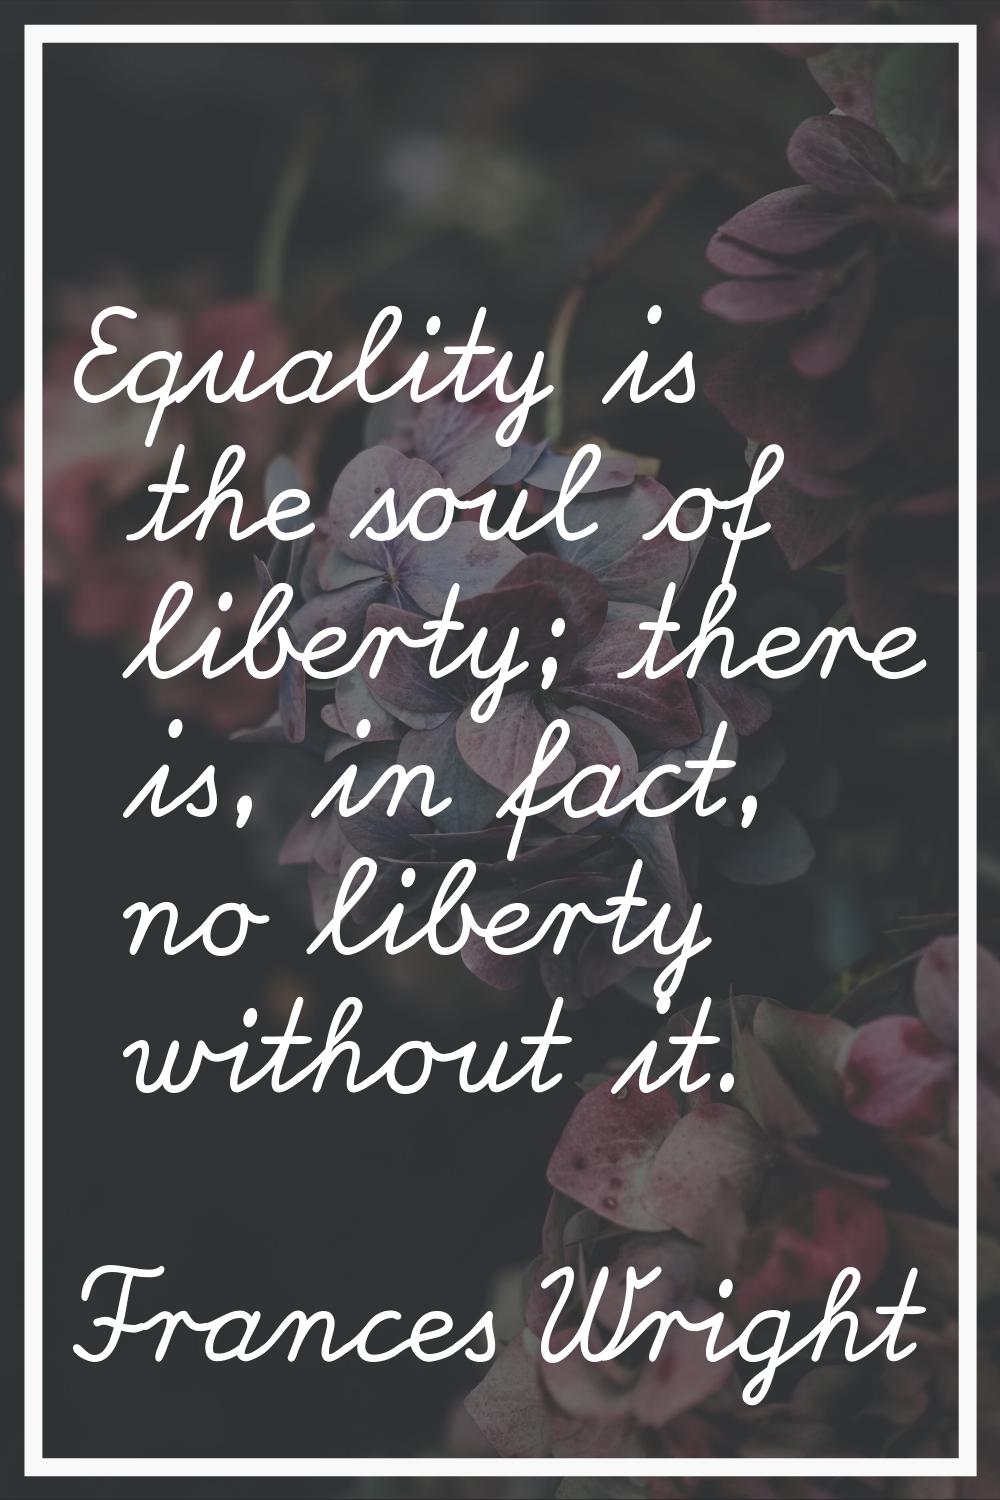 Equality is the soul of liberty; there is, in fact, no liberty without it.